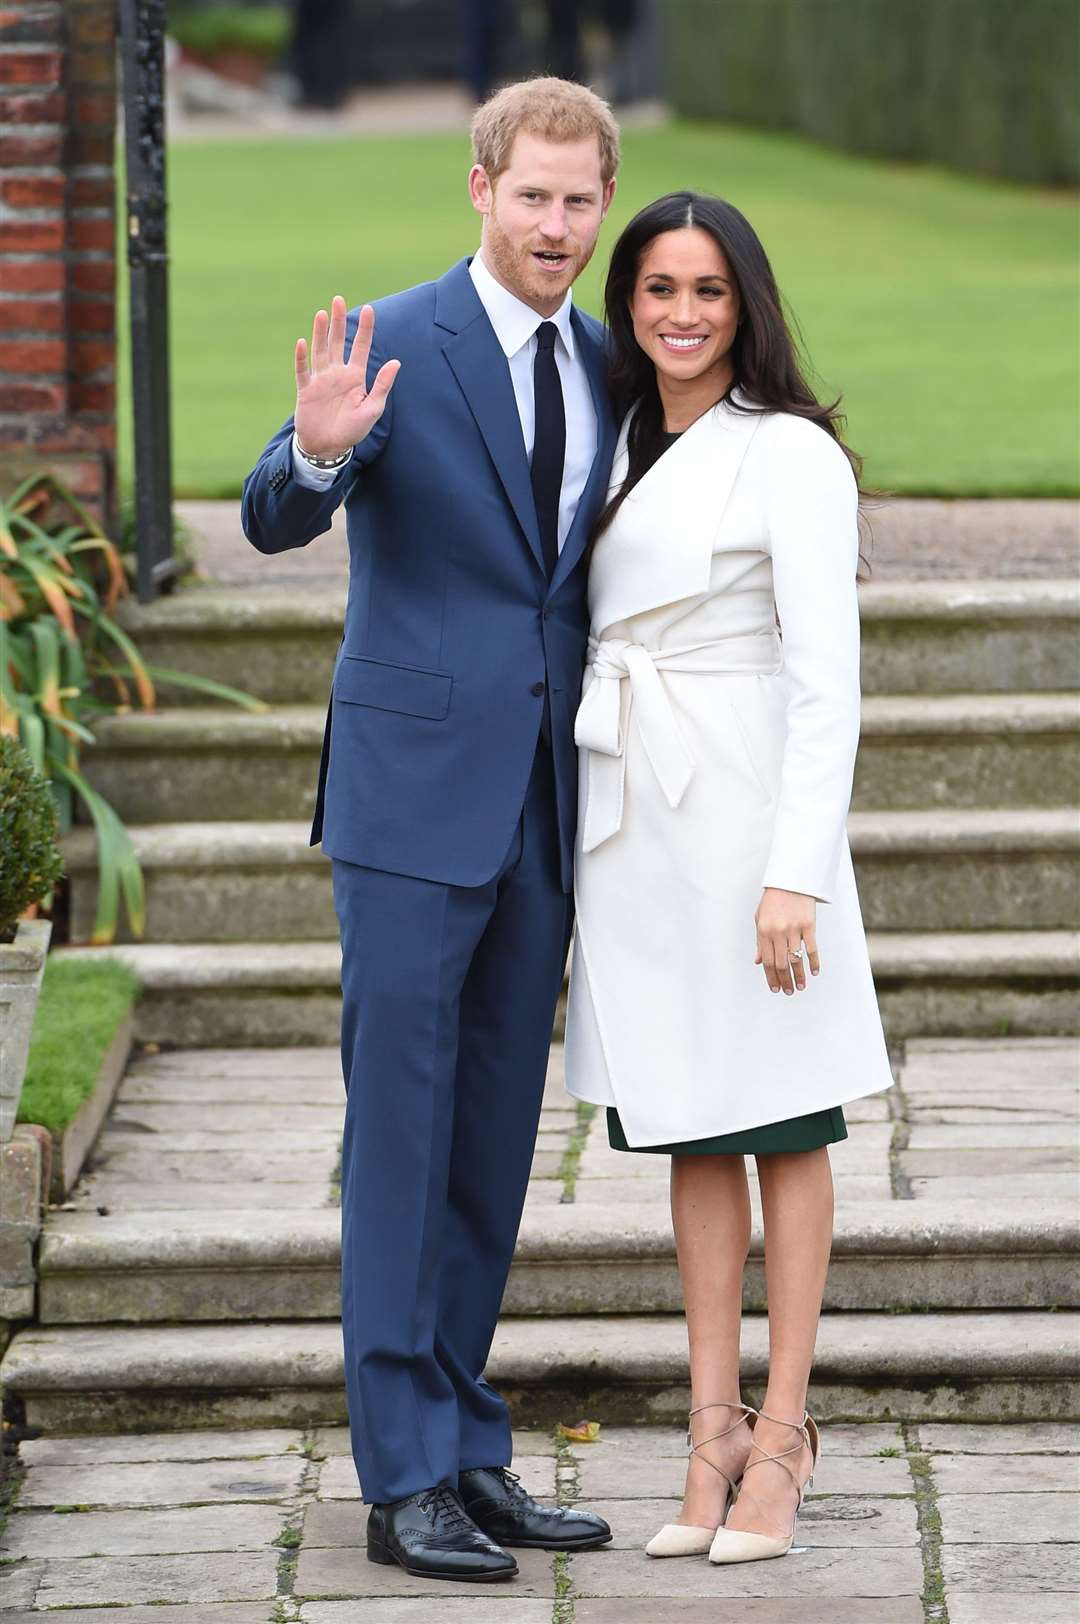 Prince Harry and Meghan Markle announcing their engagement last year